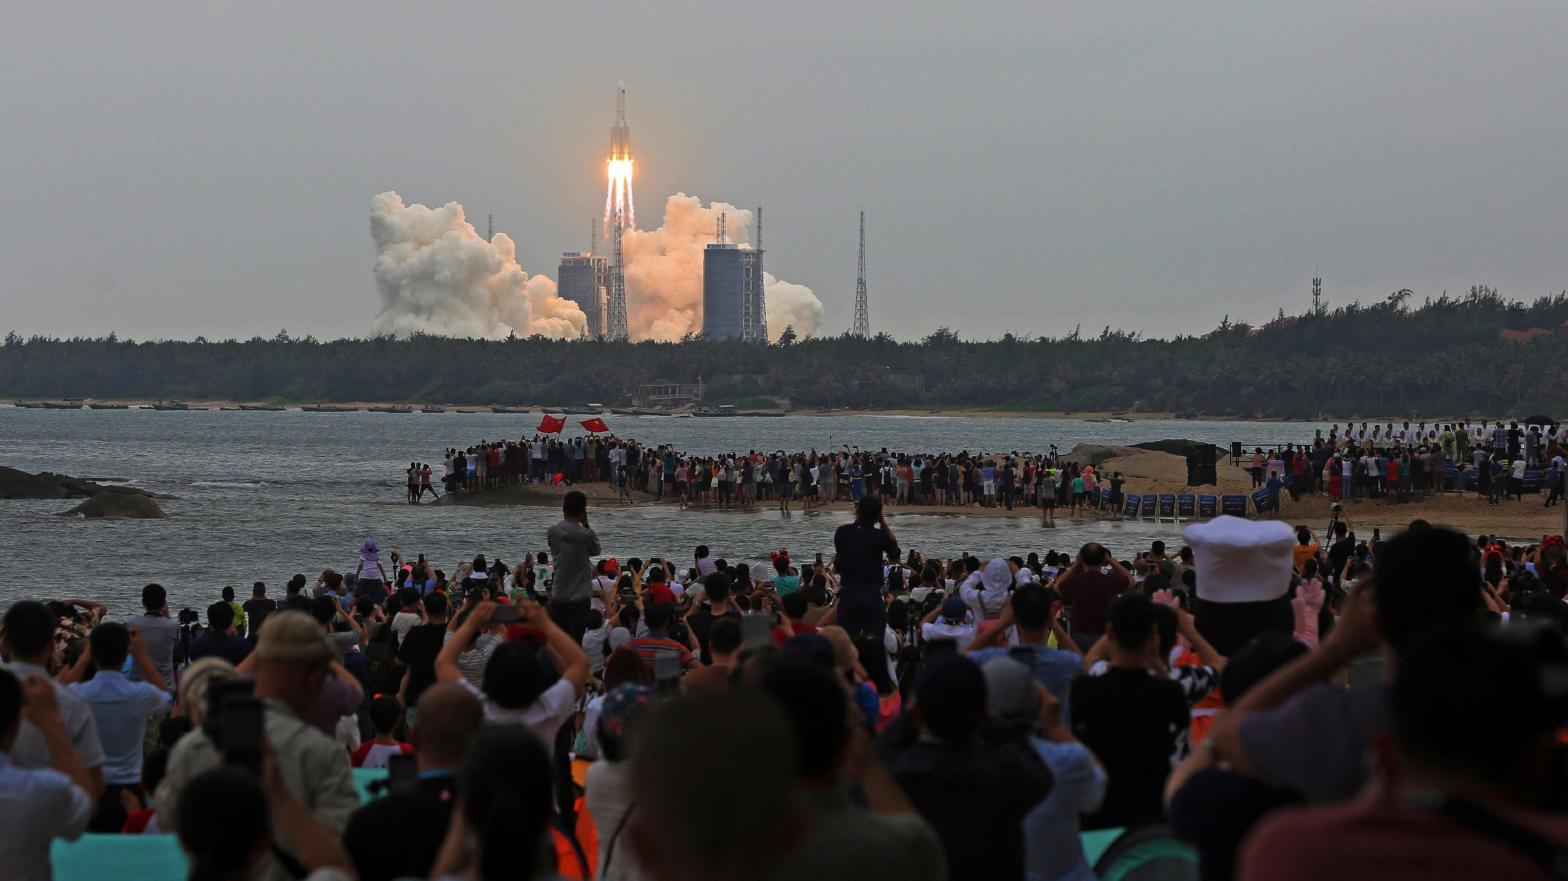 This Chinese-made Long March 5B Y2 rocket launched in April, 2021, but this type of rocket has been cited at least twice for parts left in orbit striking the Earth upon reentry. (Photo: The Yomiuri Shimbun, AP)